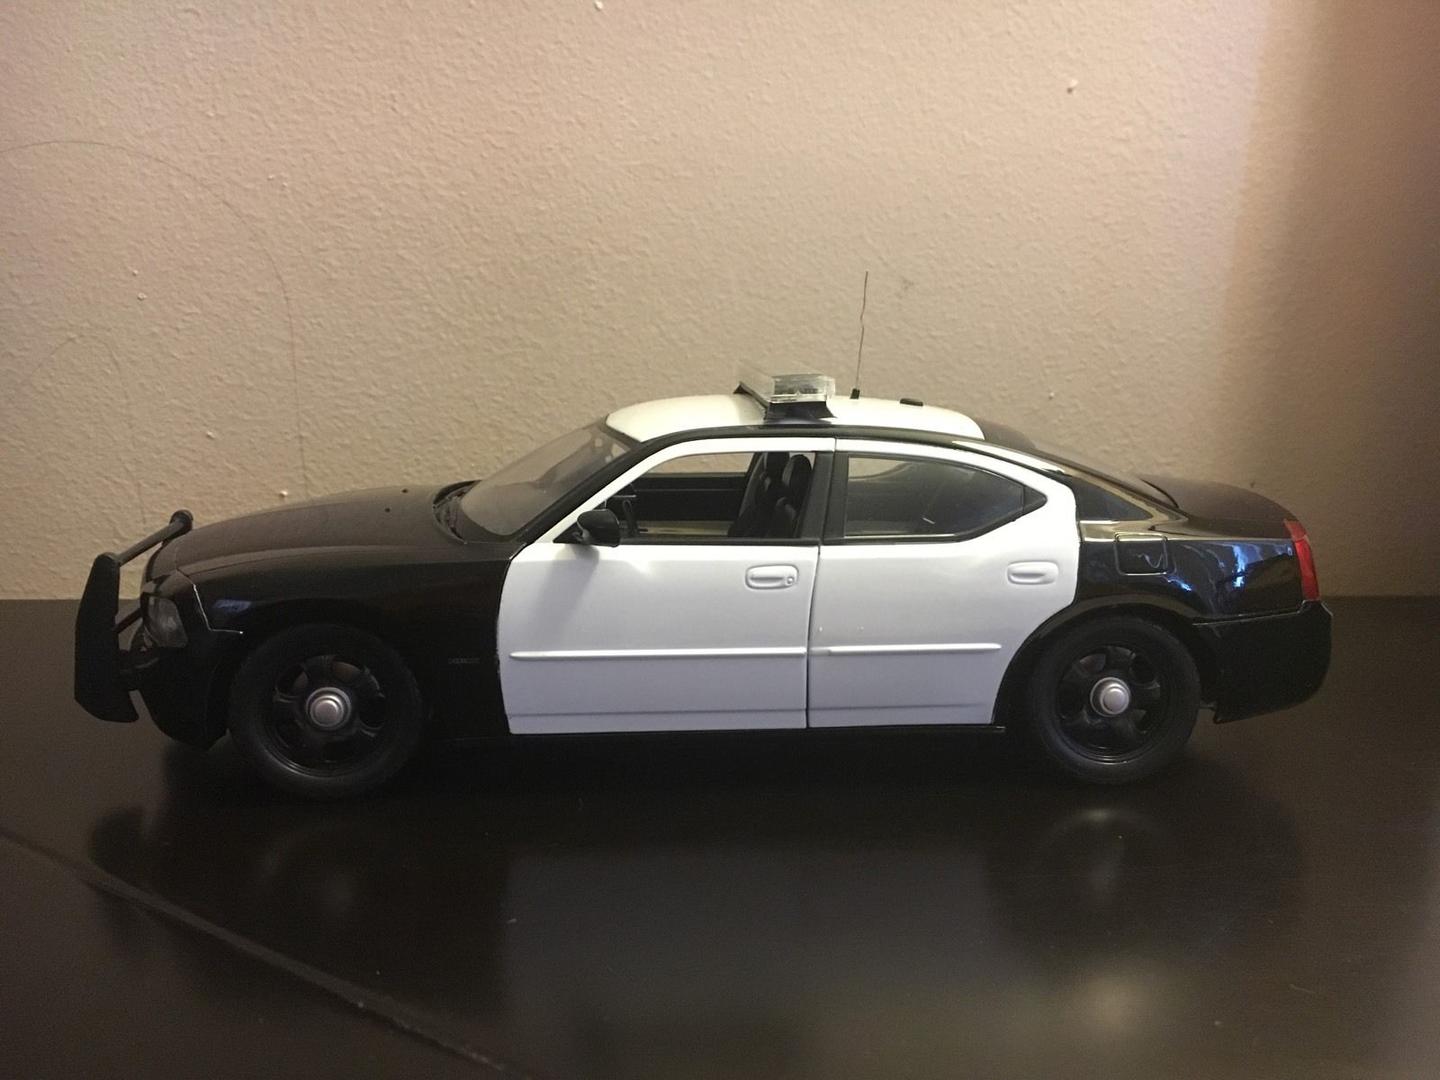 2006 DODGE CHARGER R/T HEMI UNMARKED POLICE (BLACK AND WHITE) (Échelle-Scale 1:18)